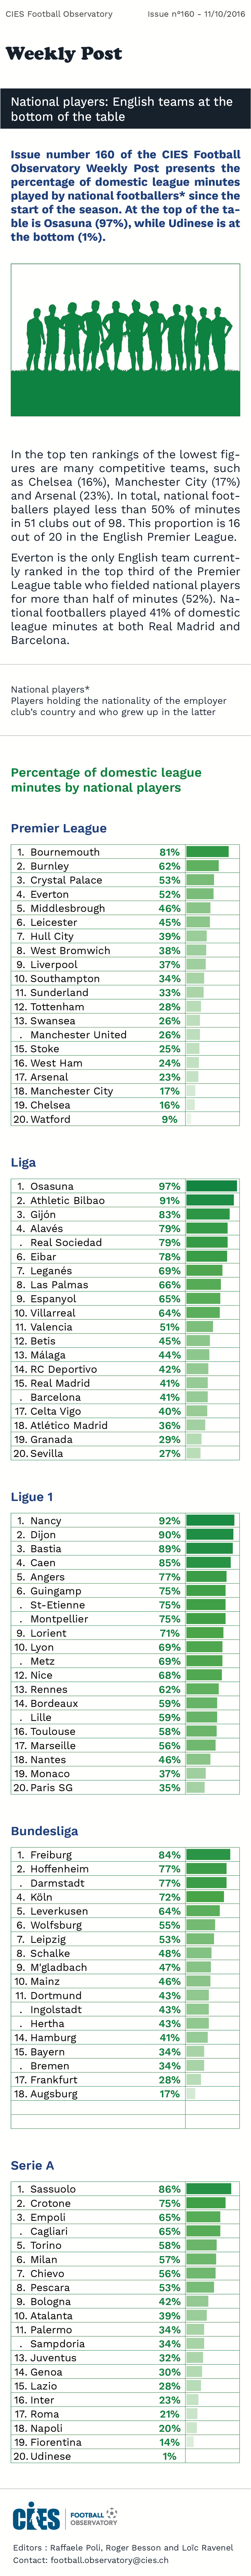 Table: Percentage of domestic league minutes by national players, big-5 league clubs